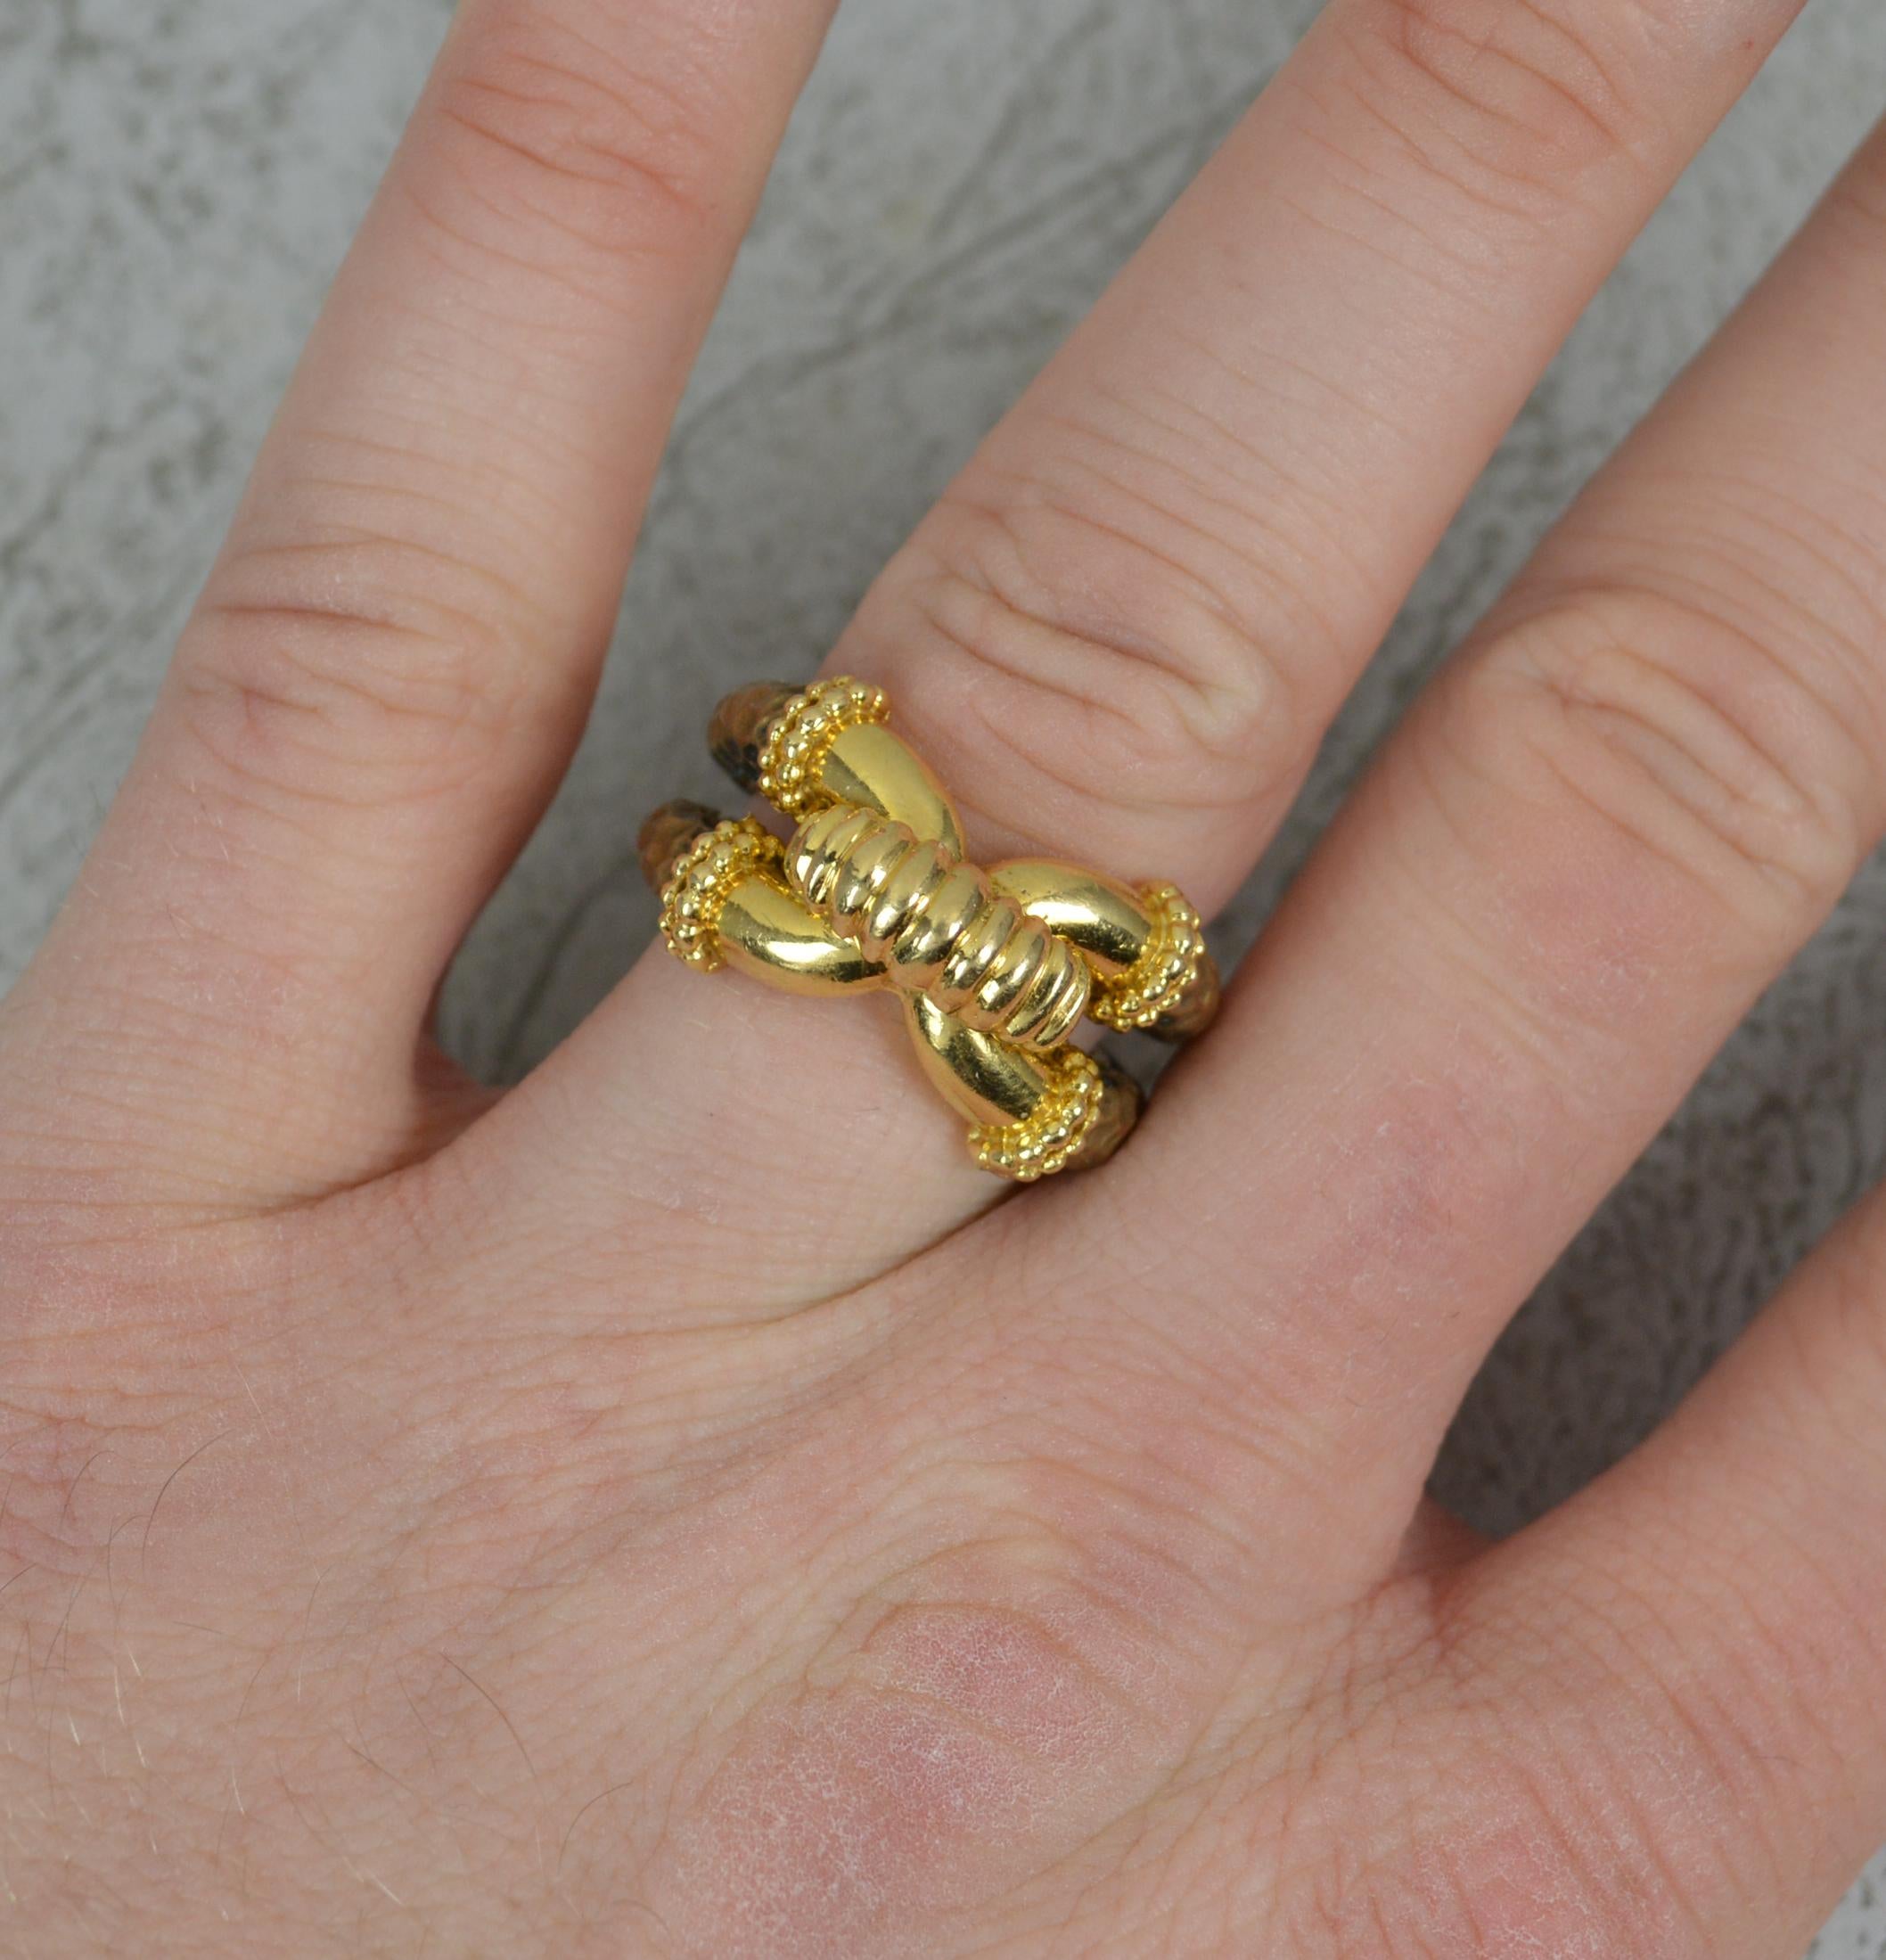 A stunning Boucheron ring.
Solid 18 carat yellow gold and bronze / airain example.
Designed as a knot or puzzle to front, 13mm wide.
The front in 18ct yellow gold, the split shoulders from airain, an alloy based on bronze creating a powerful